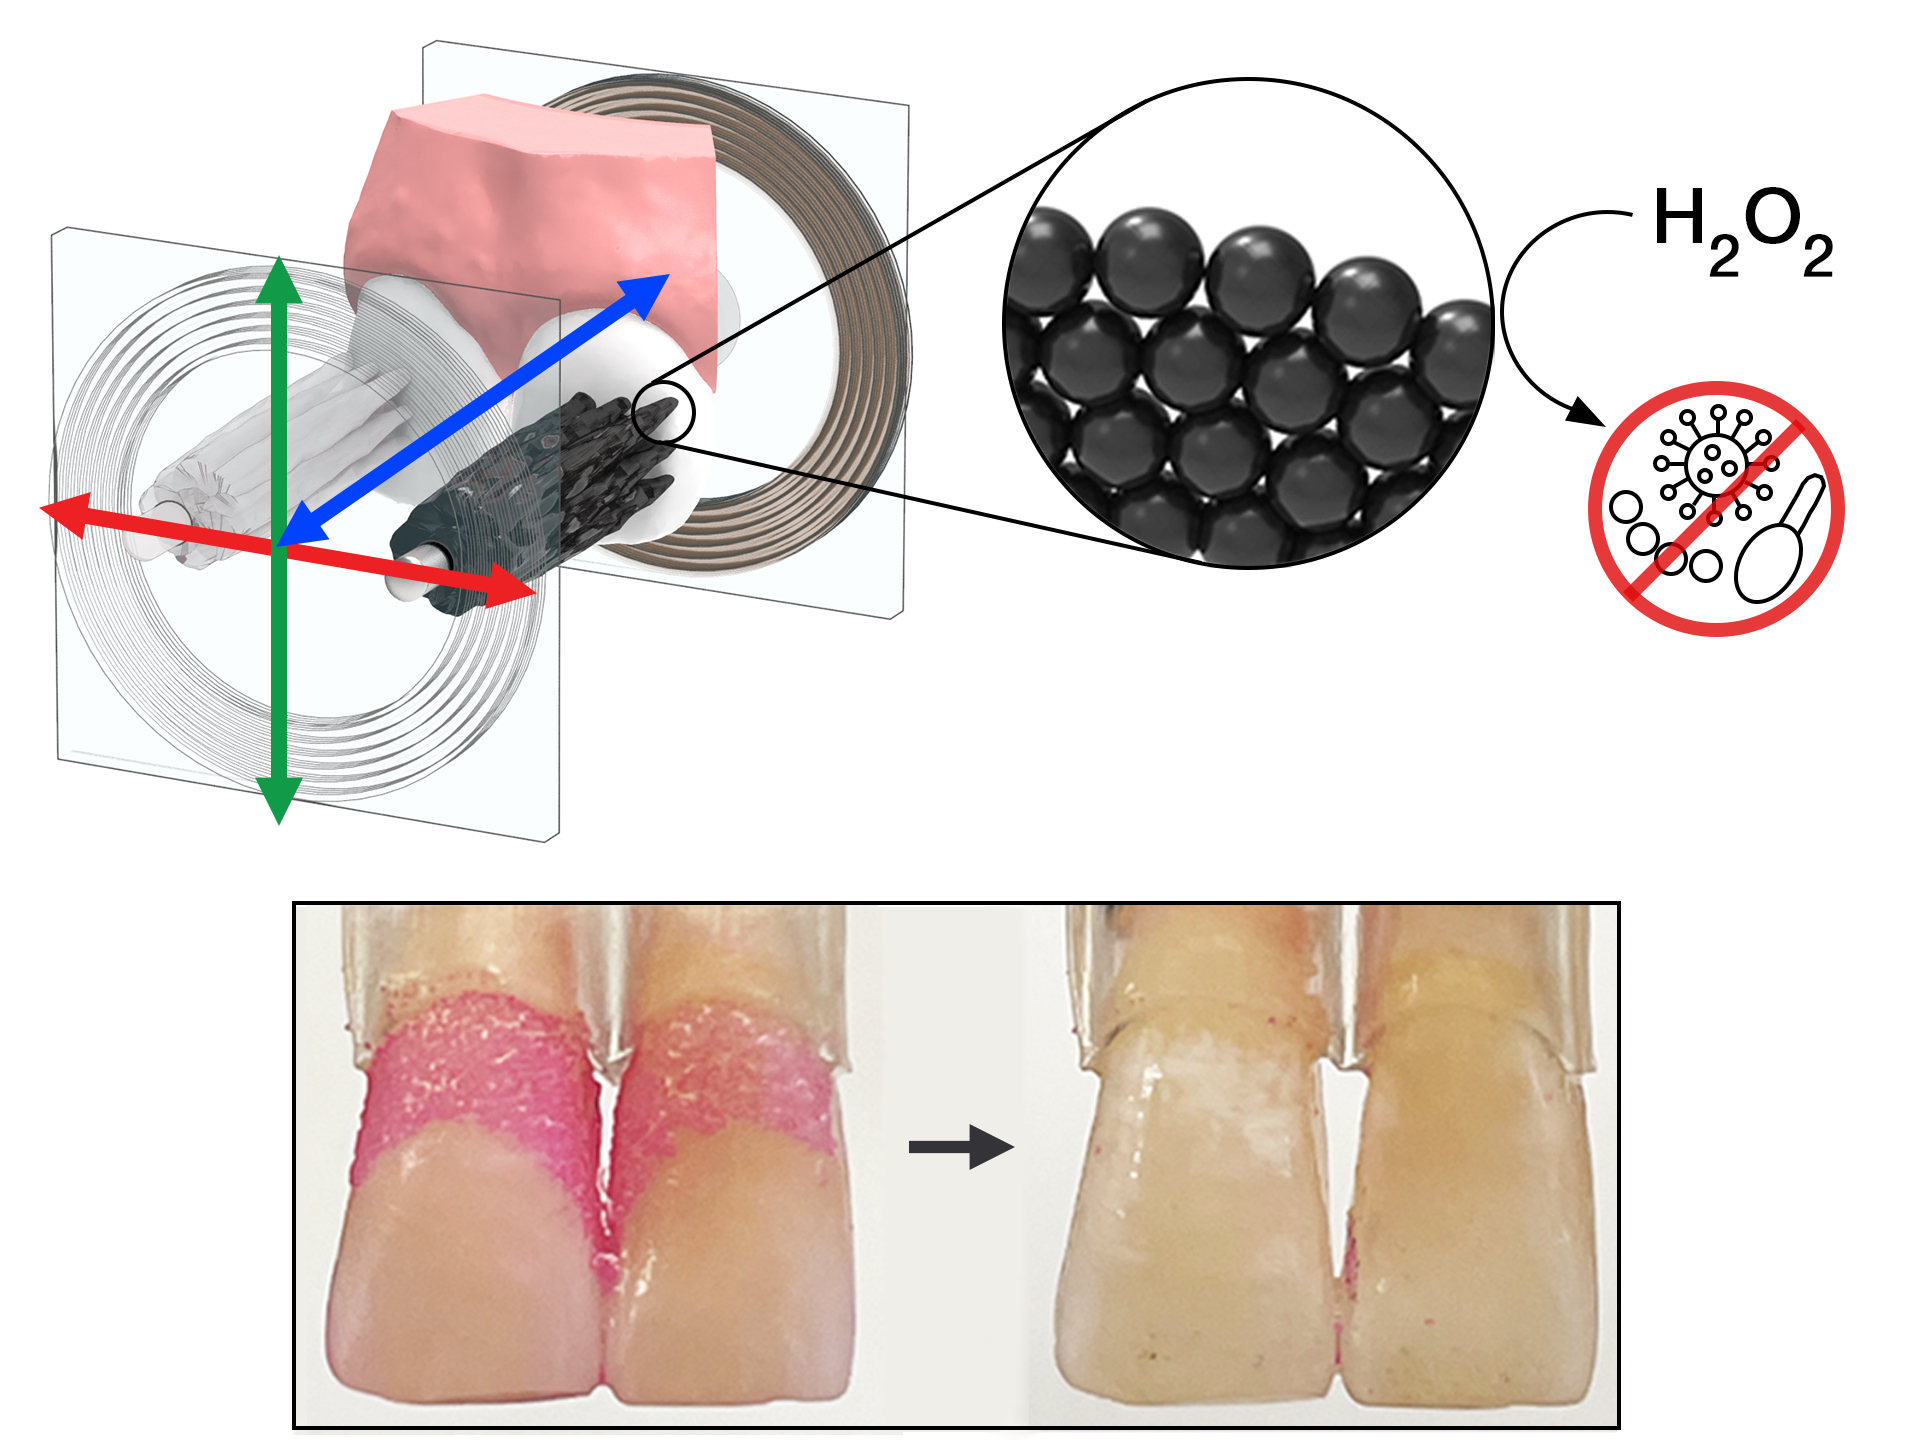 Graphic shows how nanoparticle-based microrobots can remove dental plaque from teeth with their motion and the activity of hydrogen peroxide (H2O2) to kill microbes